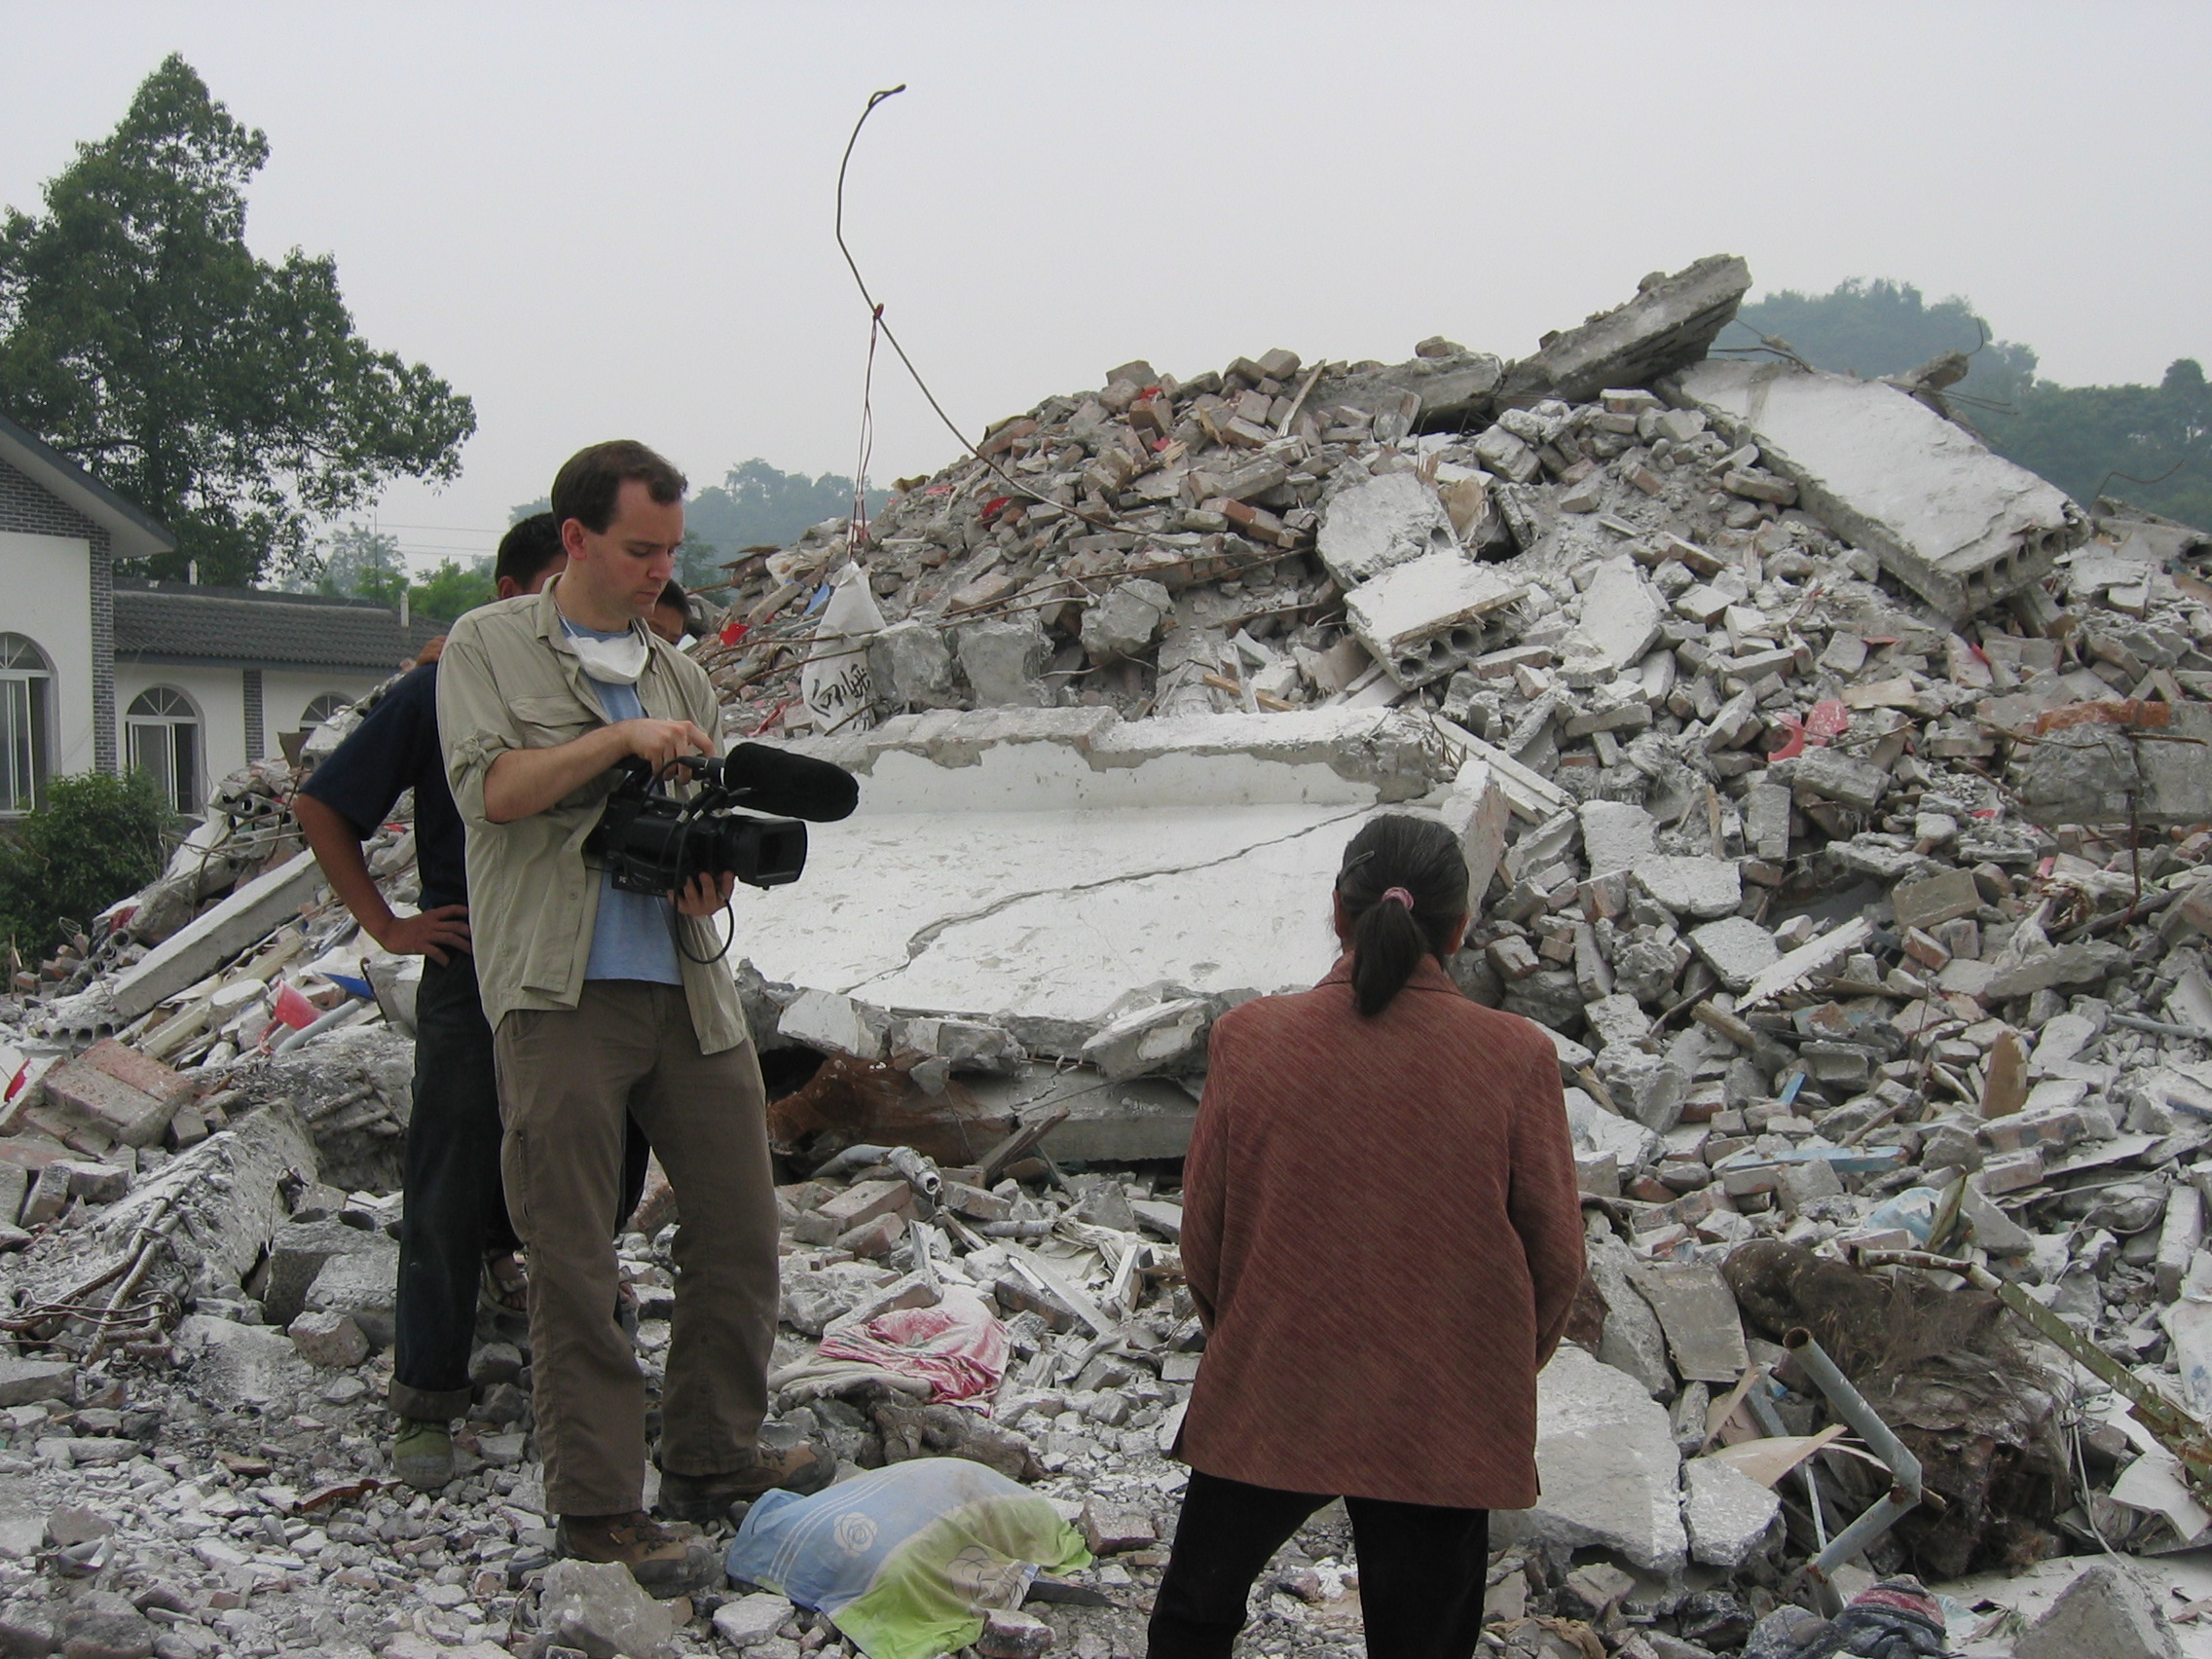 Director/Cinematographer Matthew O'Neill filming in Sichuan, China. May 2008